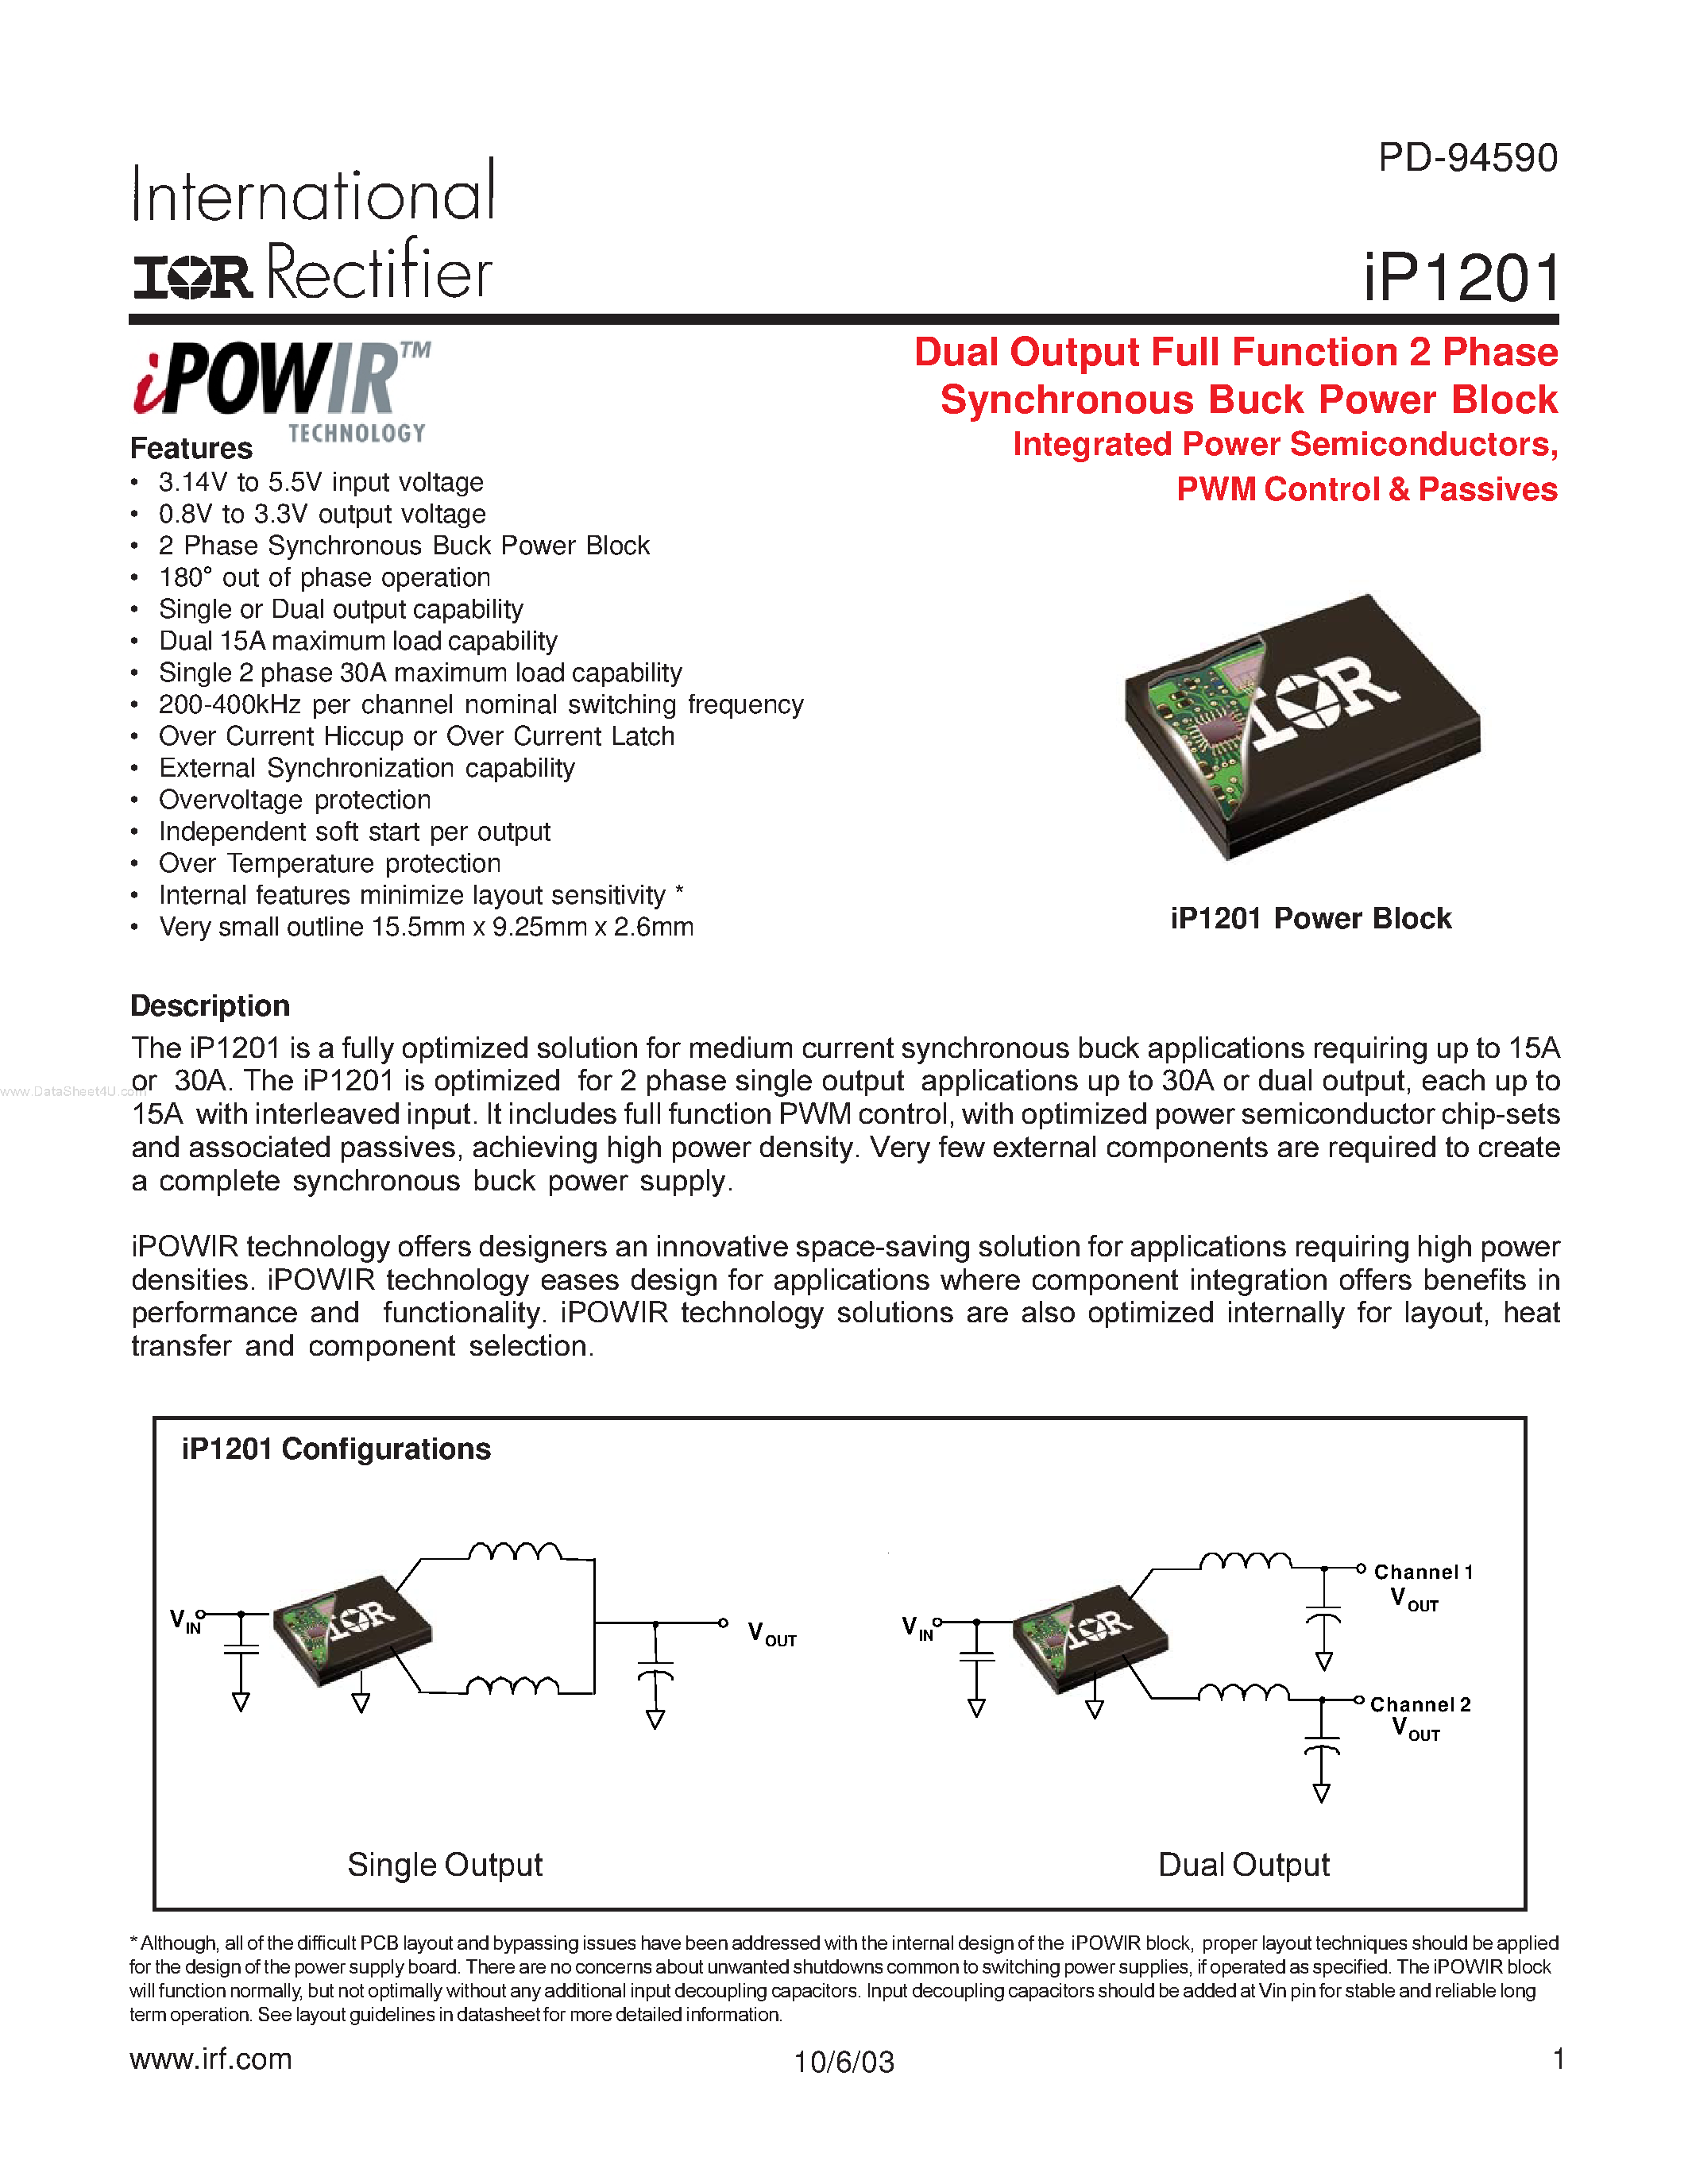 Даташит IP1201 - Dual Output Full Function 2 Phase Synchronous Buck Power Block Integrated Power Semiconductors страница 1